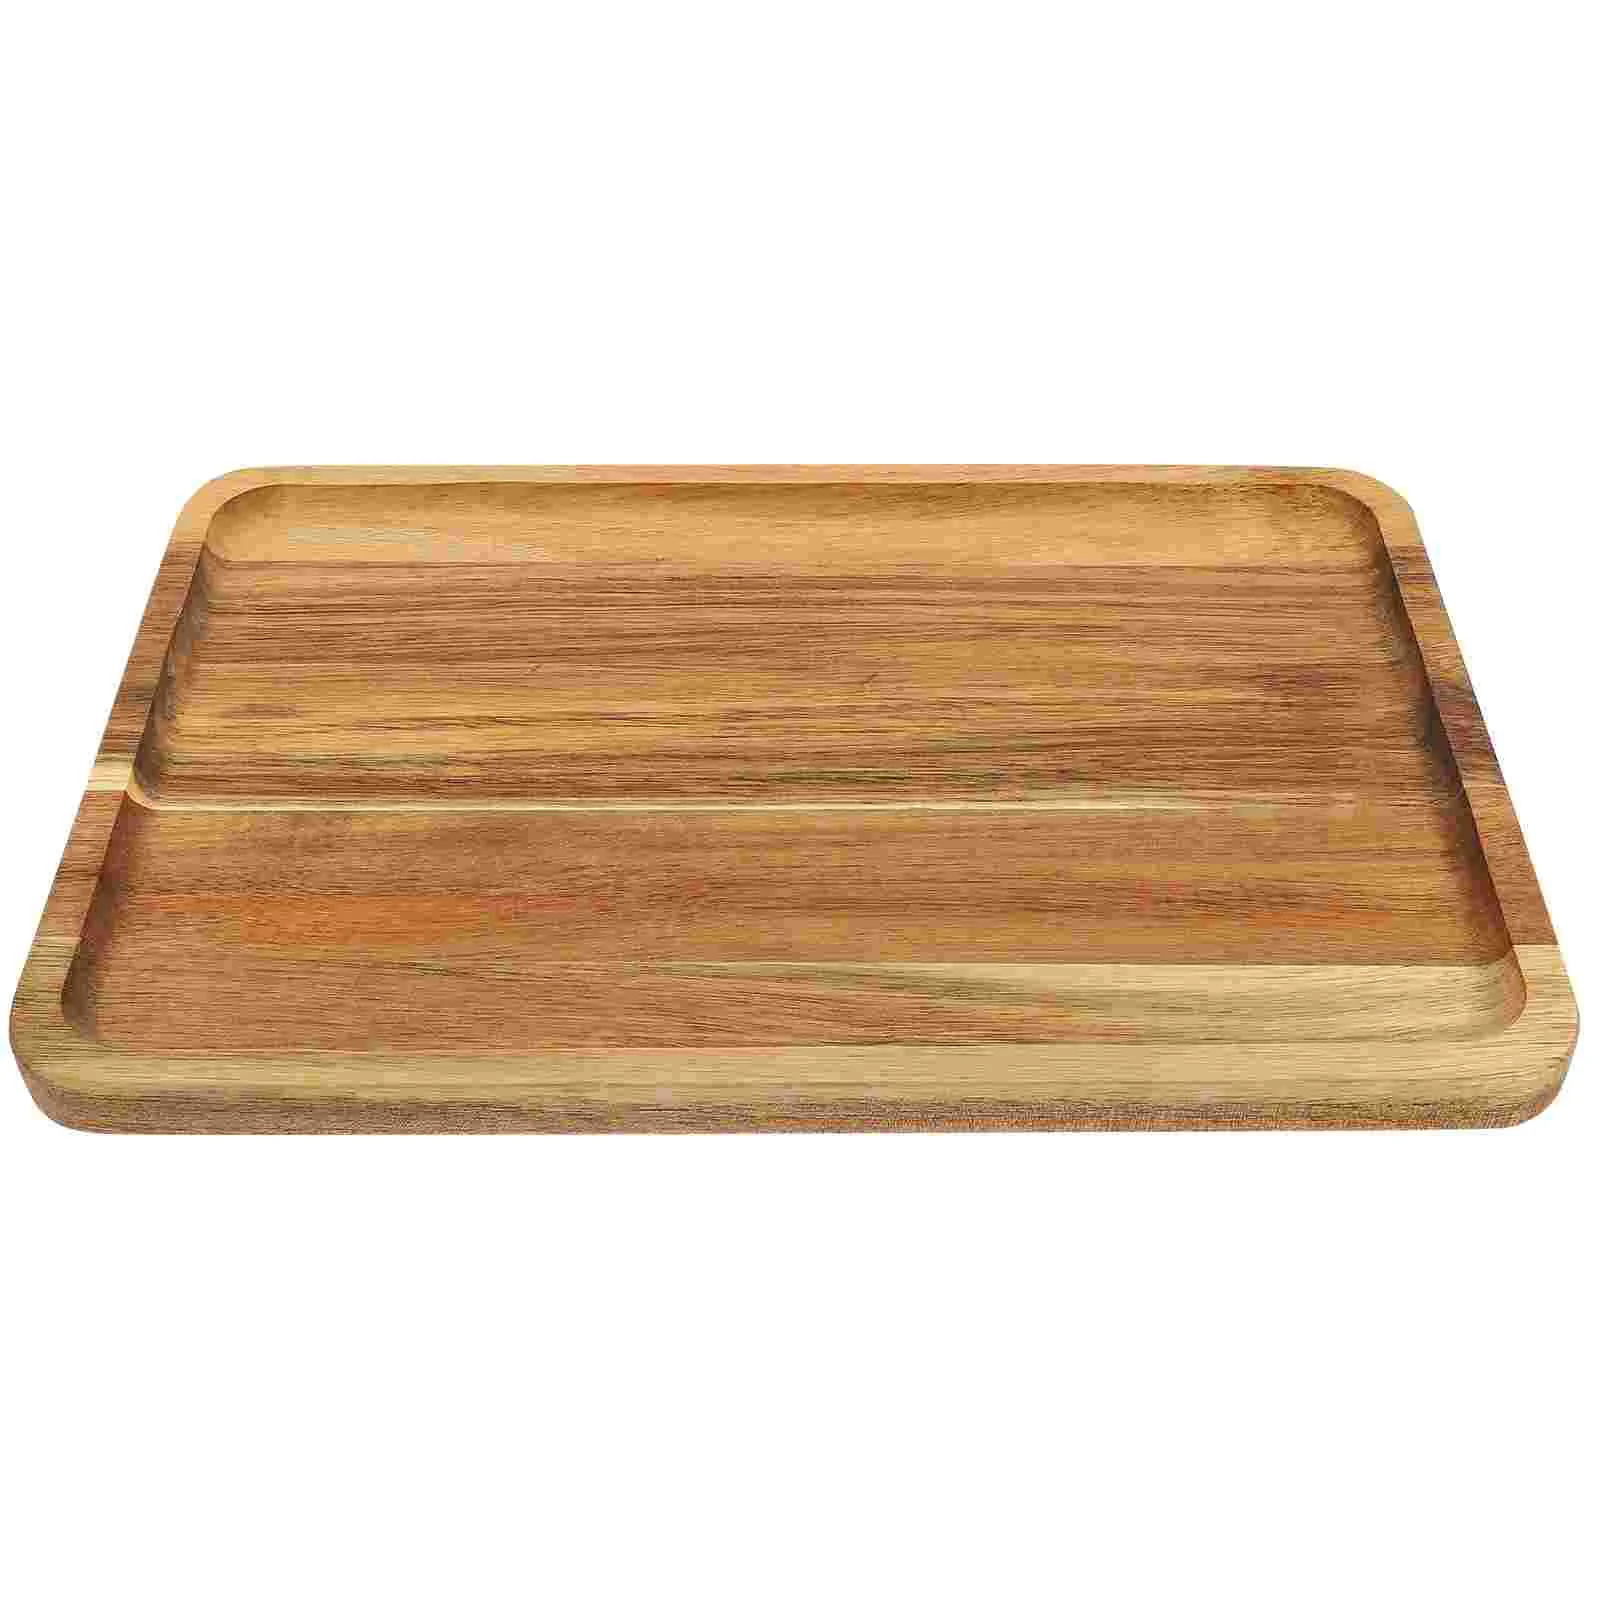 

Tray Serving Wood Plate Decorative Plates Wooden Board Appetizer Snack Fruit Cheese Rectangular Dessert Salad Charcuterie Dinner